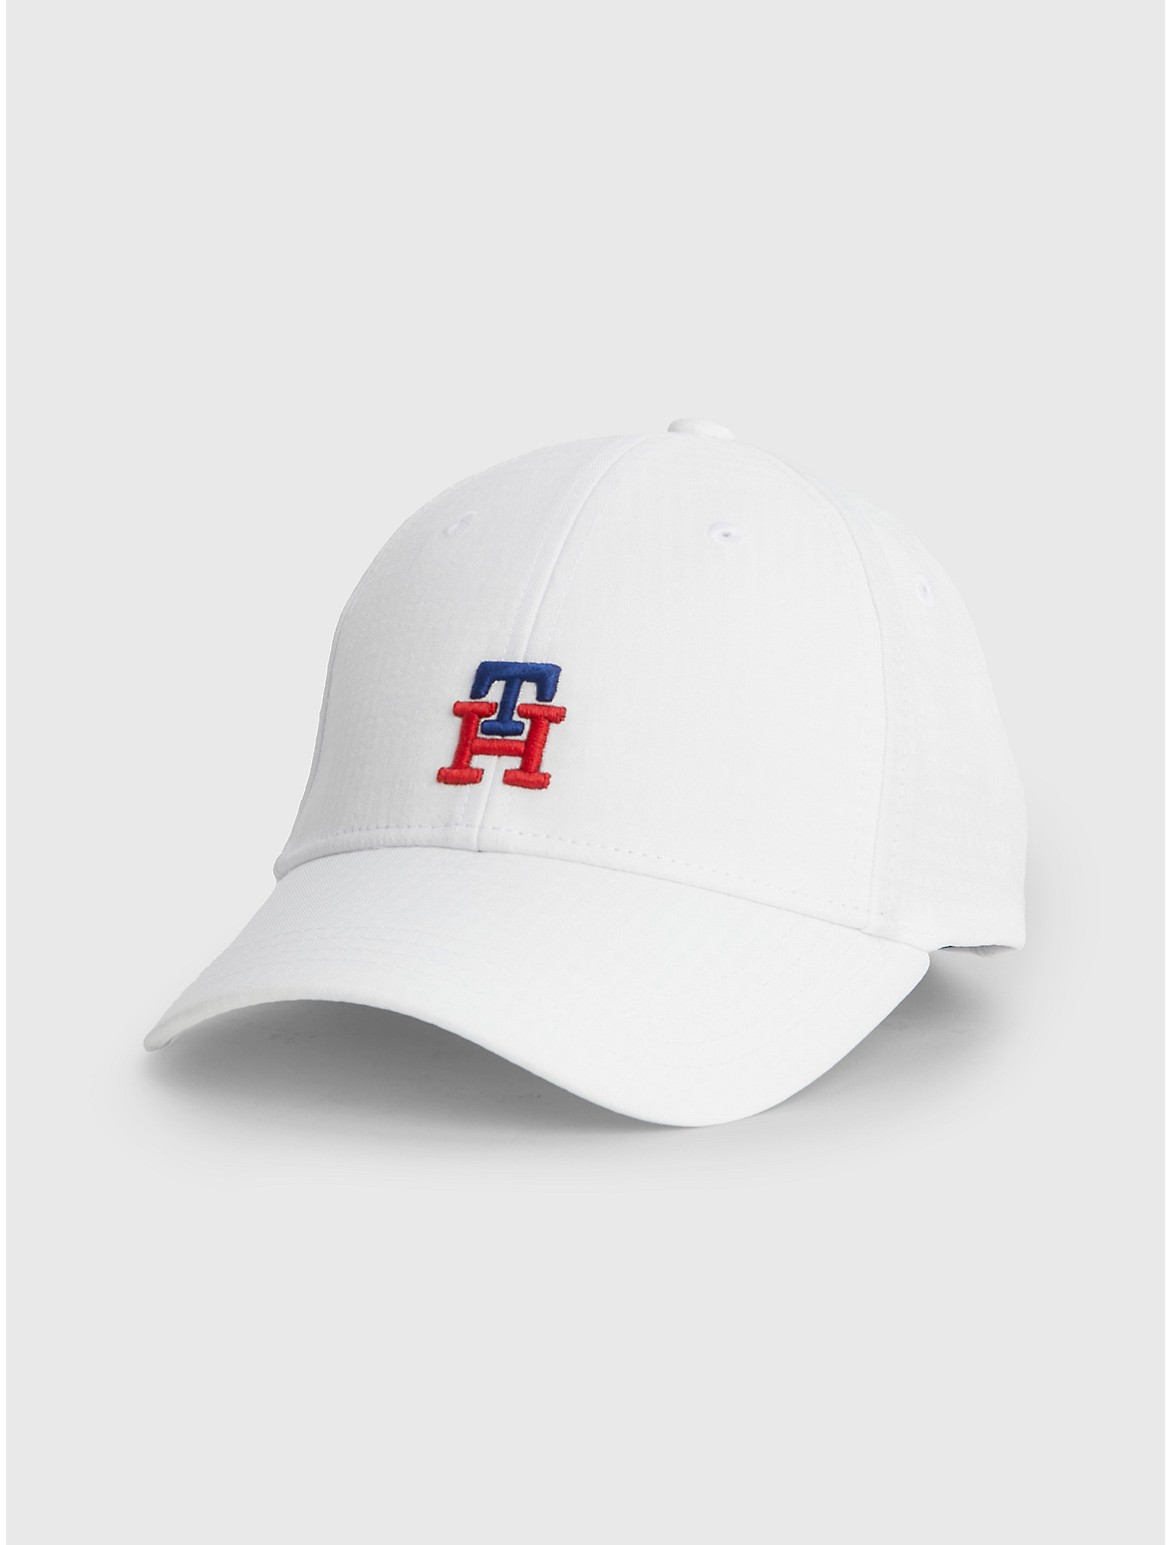 Tommy Hilfiger Kids' Embroidered Logo Cap - White - S-M